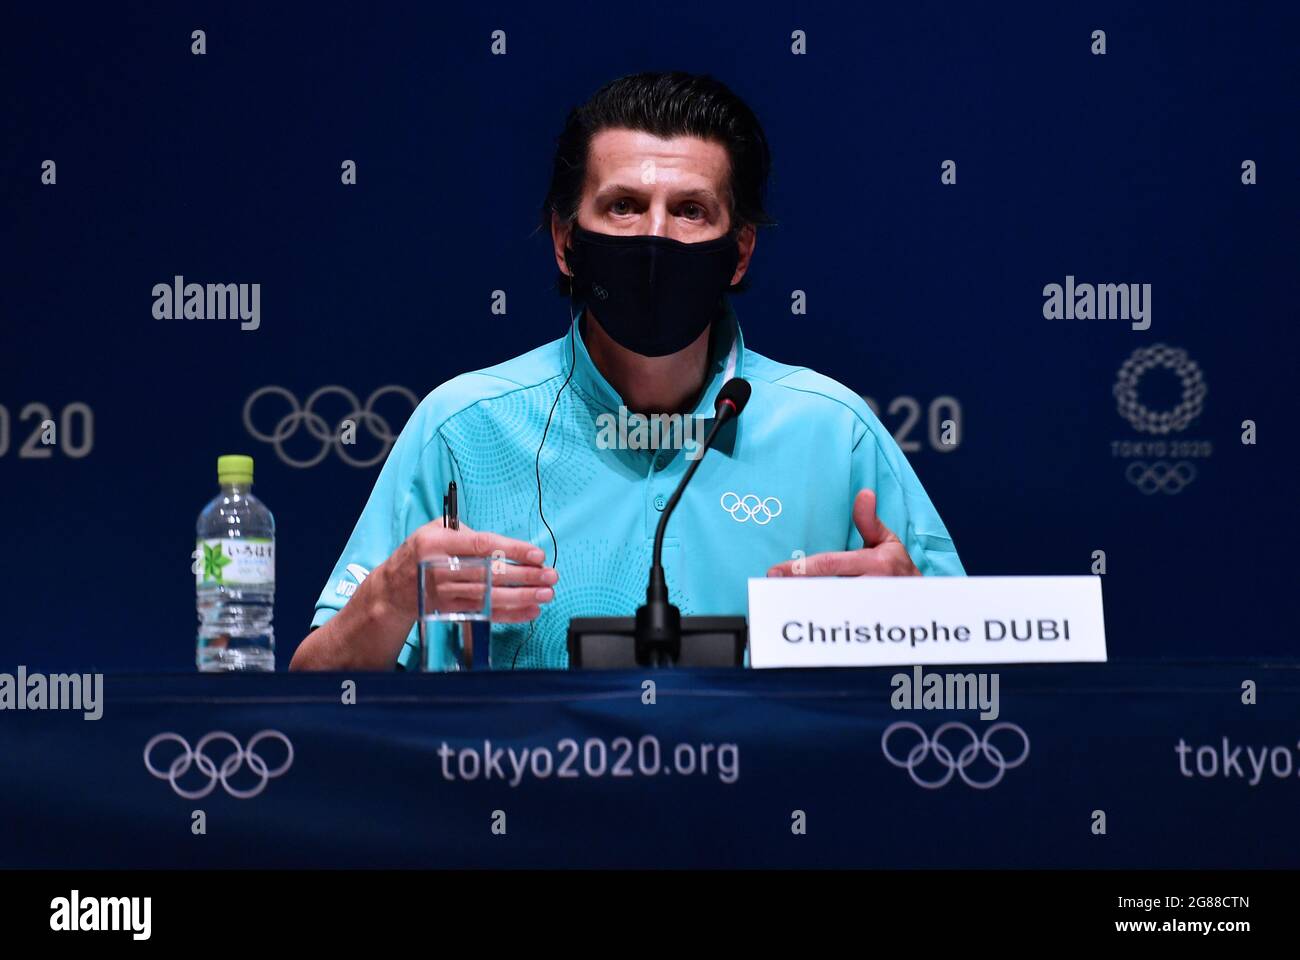 Tokyo, Japan. 18th July, 2021. International Olympic Committee's Olympic Games Executive Director Christophe Dubi attends a press conference at the Main Press Center (MPC) of Tokyo 2020 in Tokyo, Japan, July 18, 2021. Credit: He Changshan/Xinhua/Alamy Live News Stock Photo